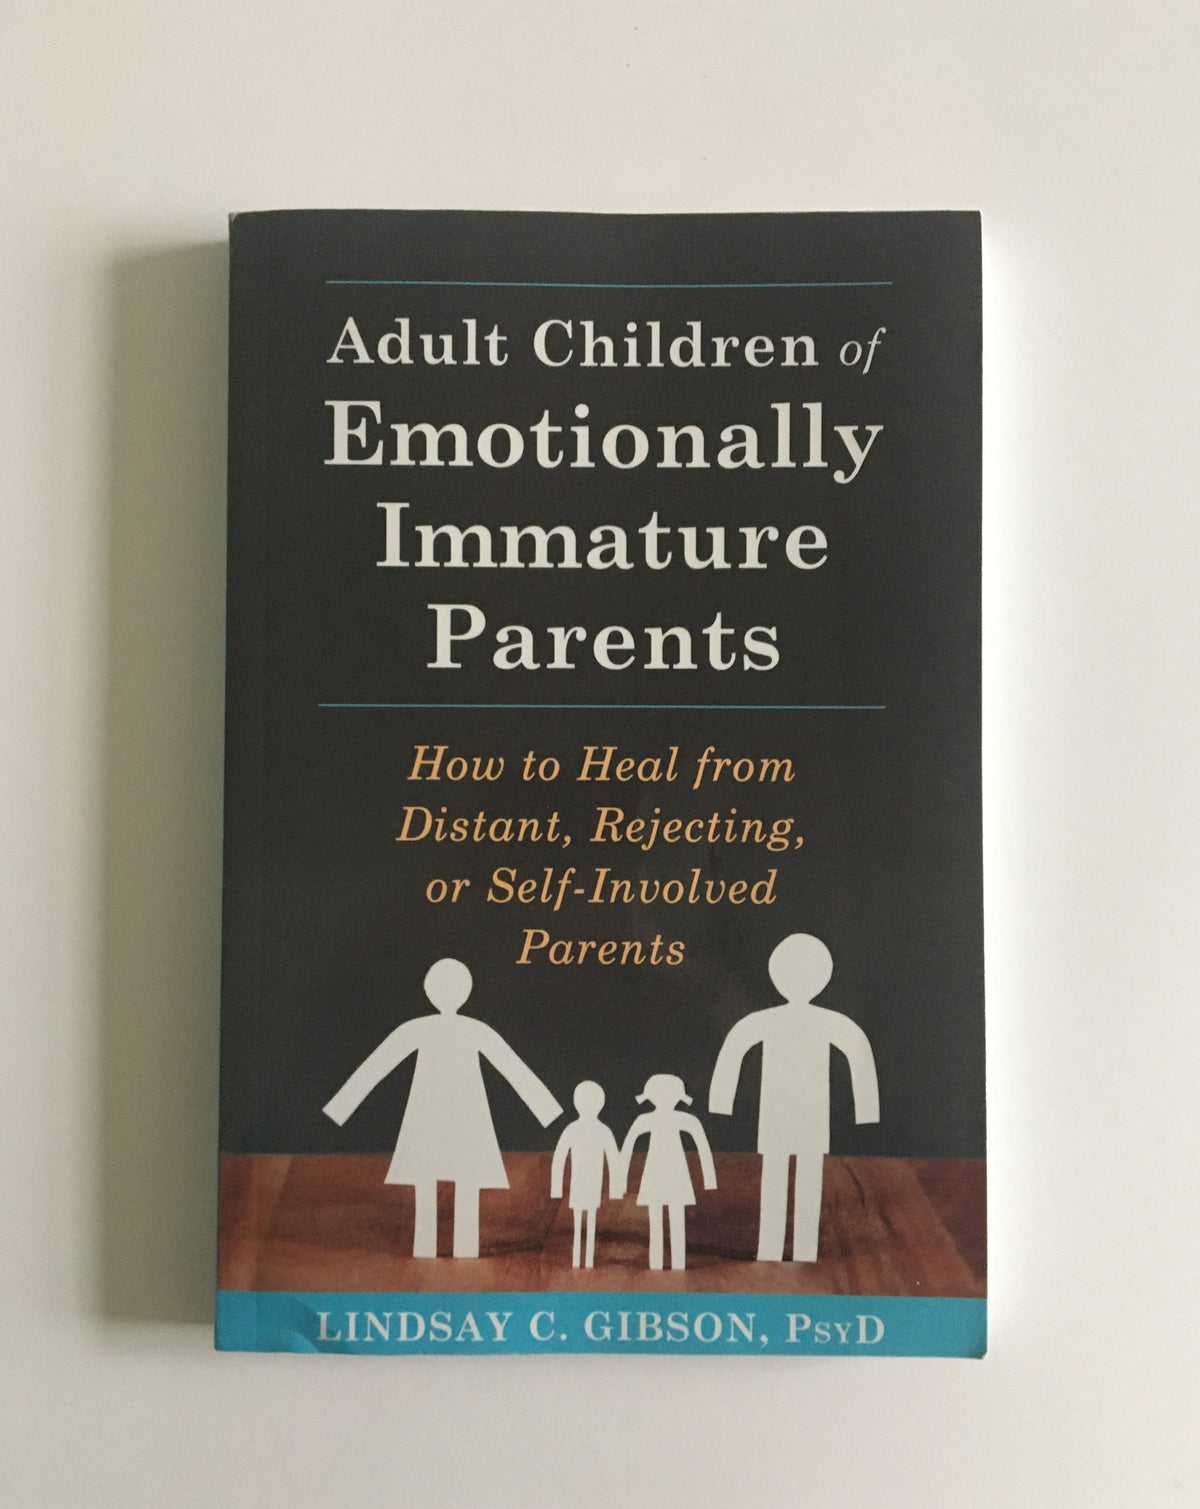 Adult Children of Emotionally Immature Parents: How to Heal from Distant, Rejecting, or Self-Involved Parents by Lindsay G. Gibson